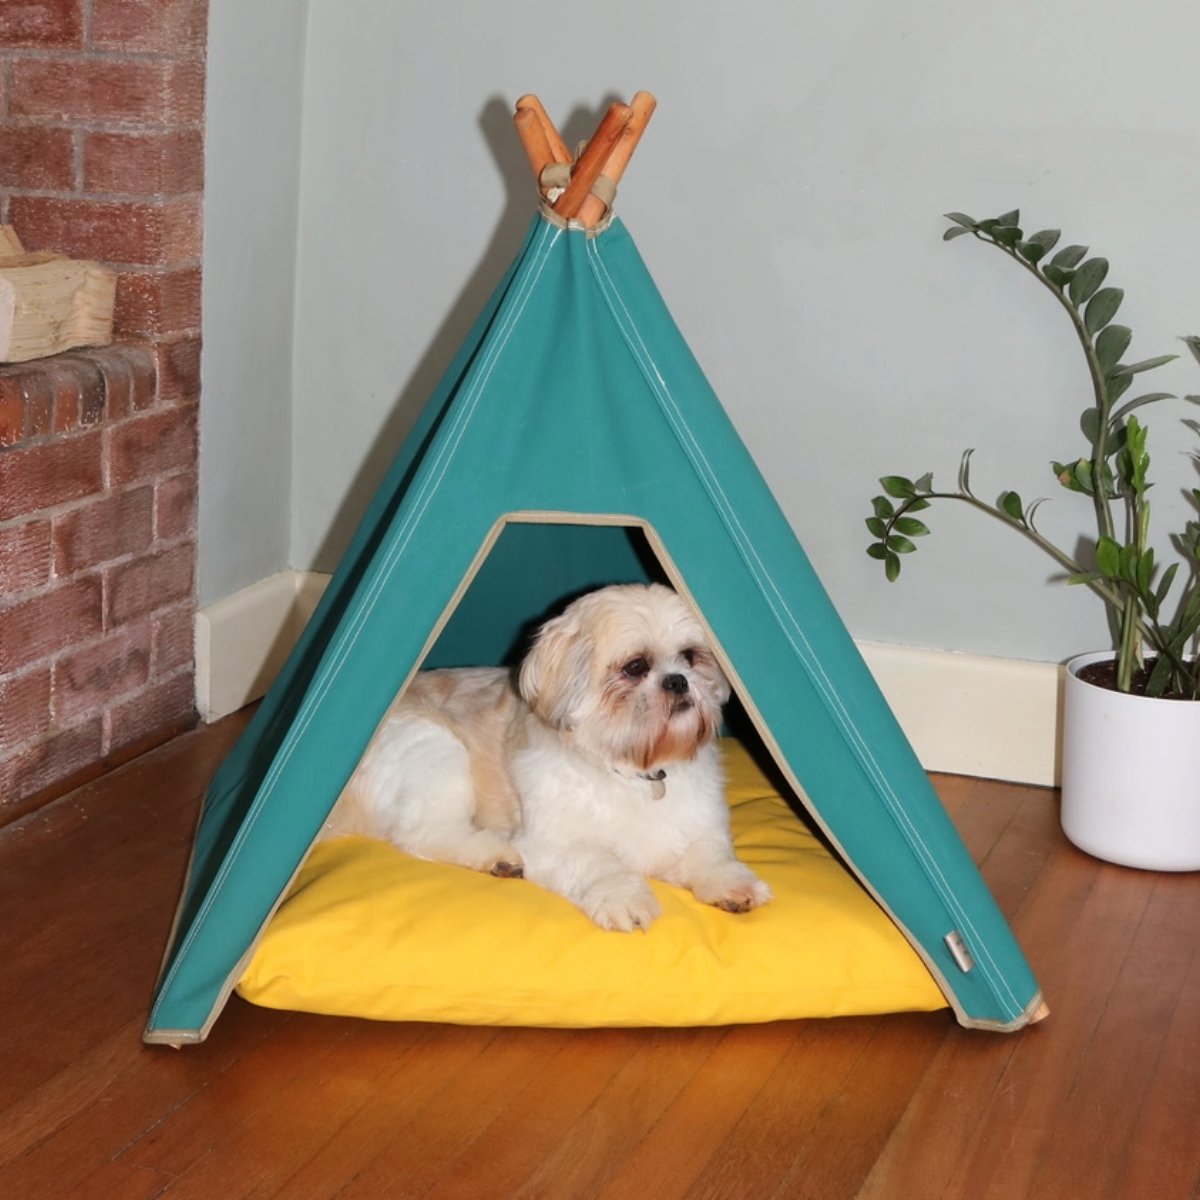 Pooch & Paws Handmade Dog Teepee, Forest Green